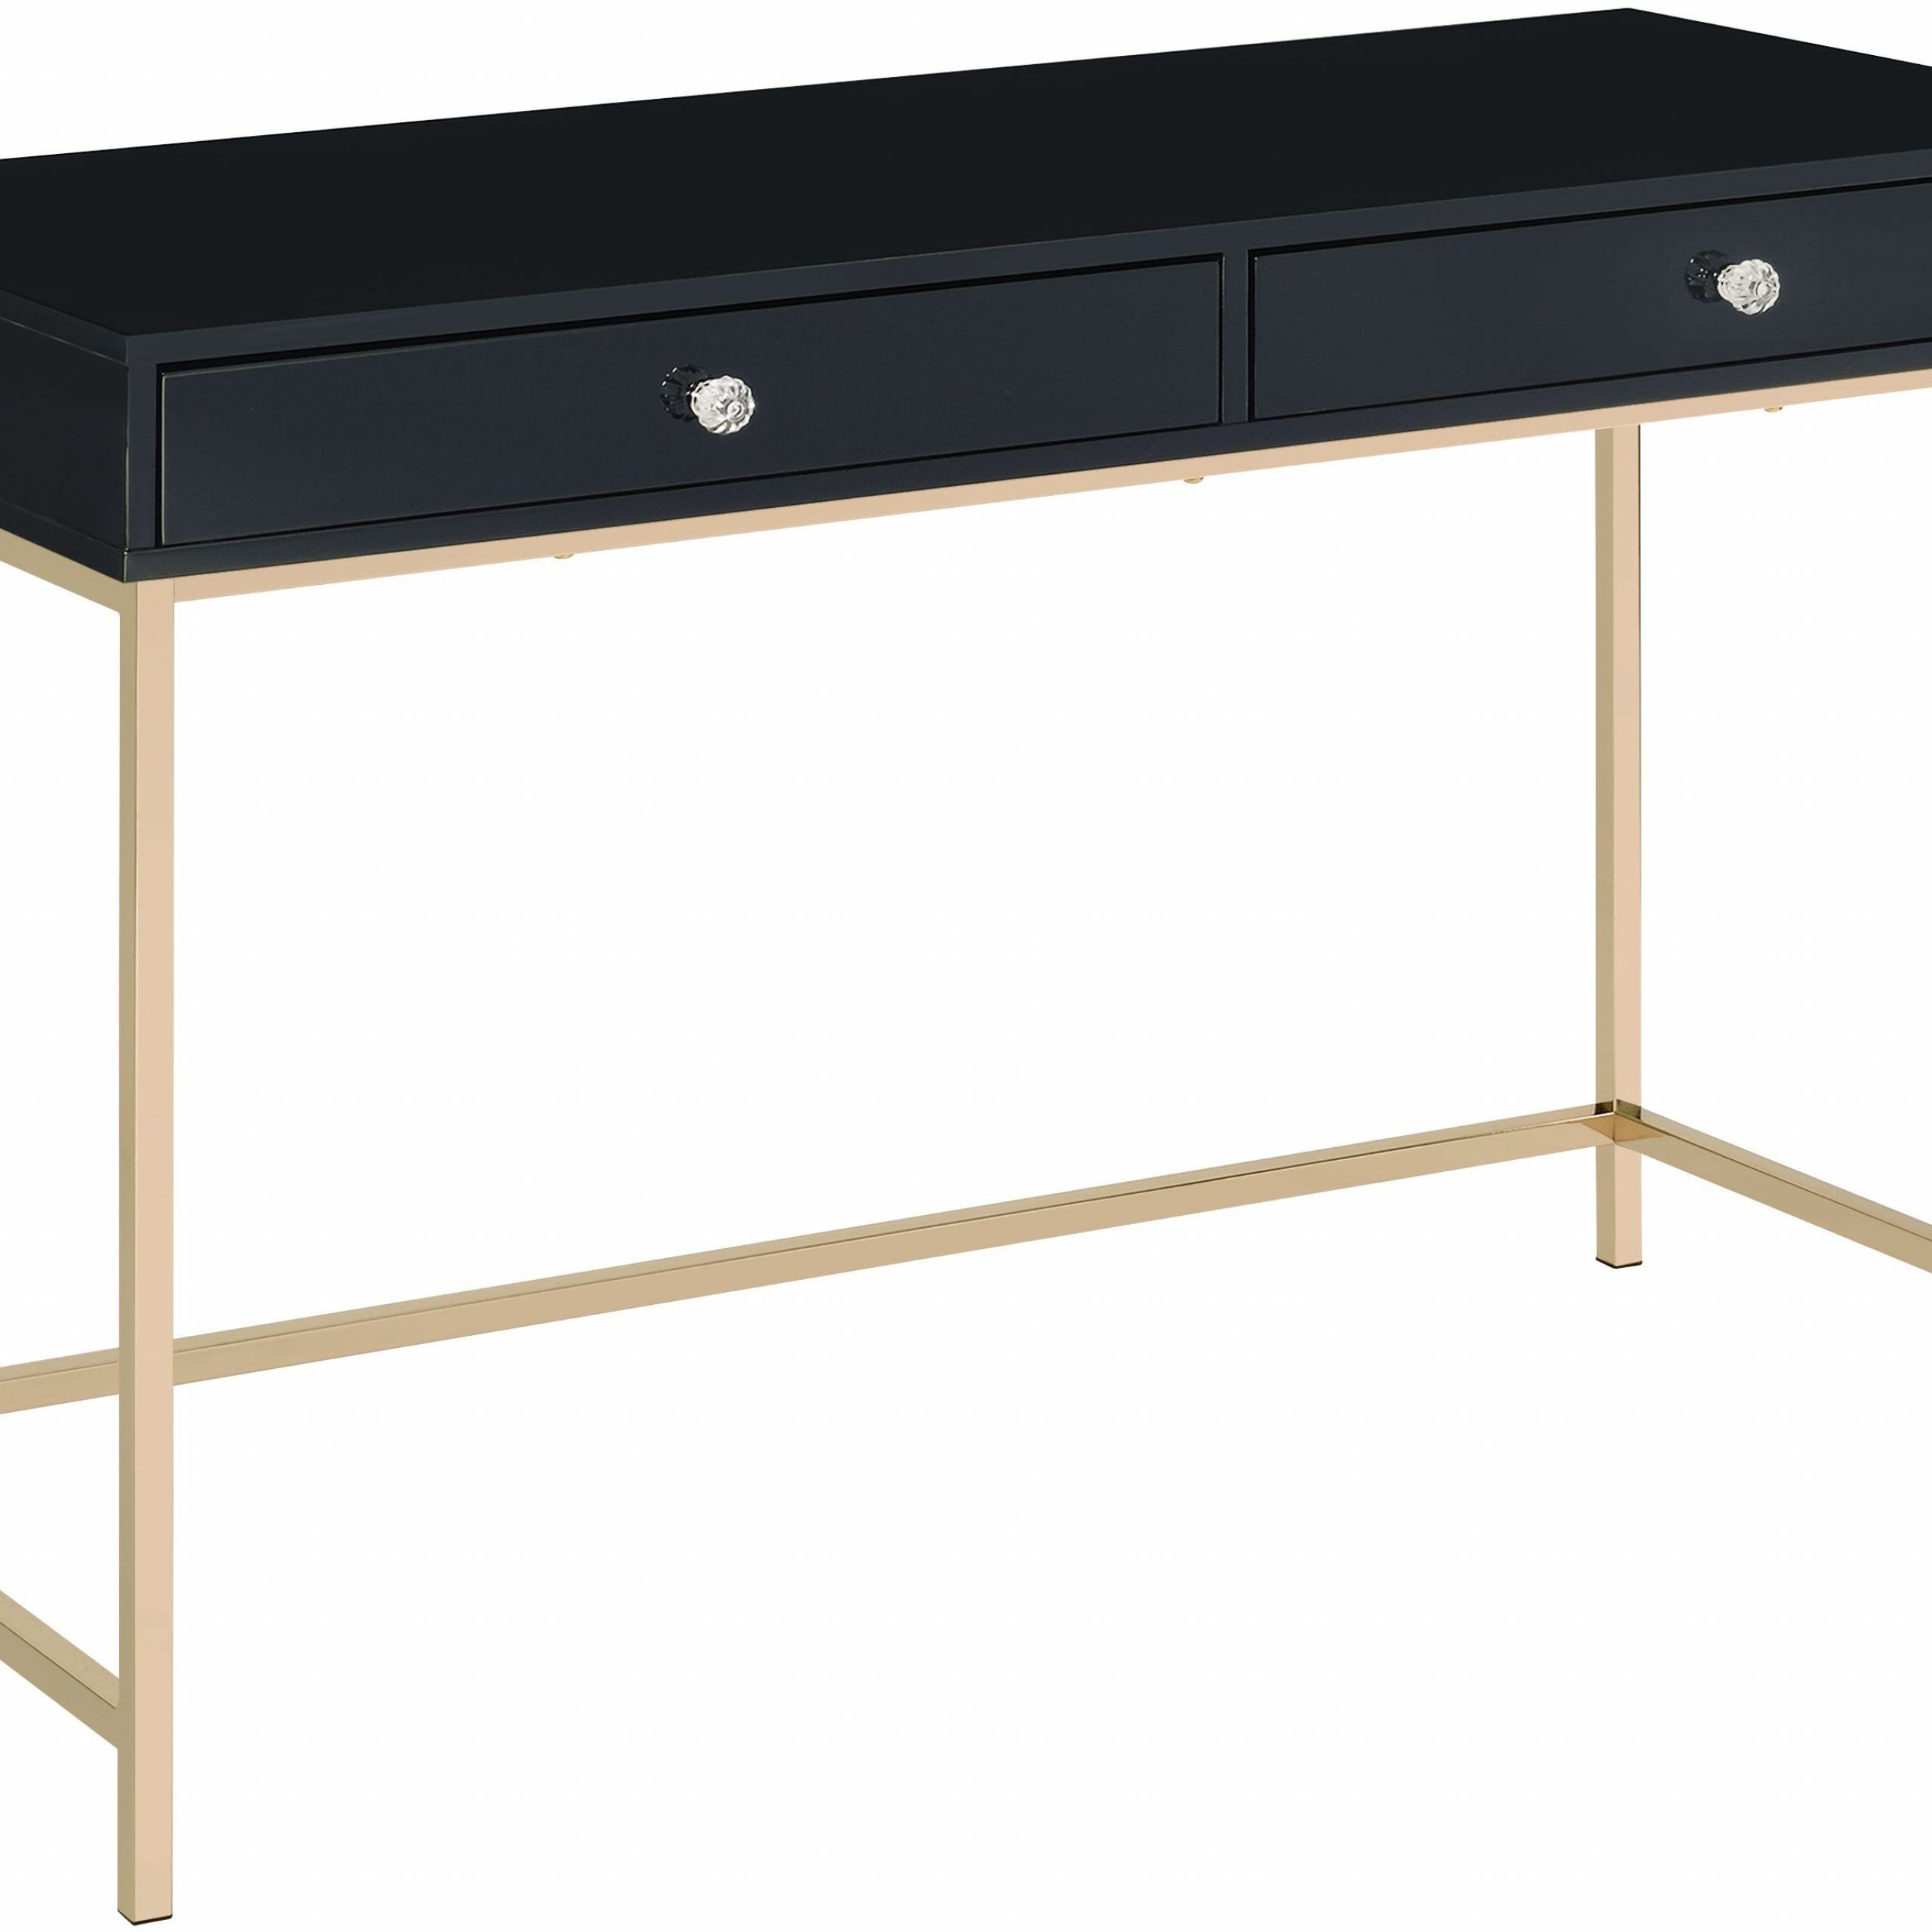 Black And Gold Writing Desks With Well Known Ottey Writing Desk In Black High Gloss & Gold Finish – Walmart (View 1 of 15)